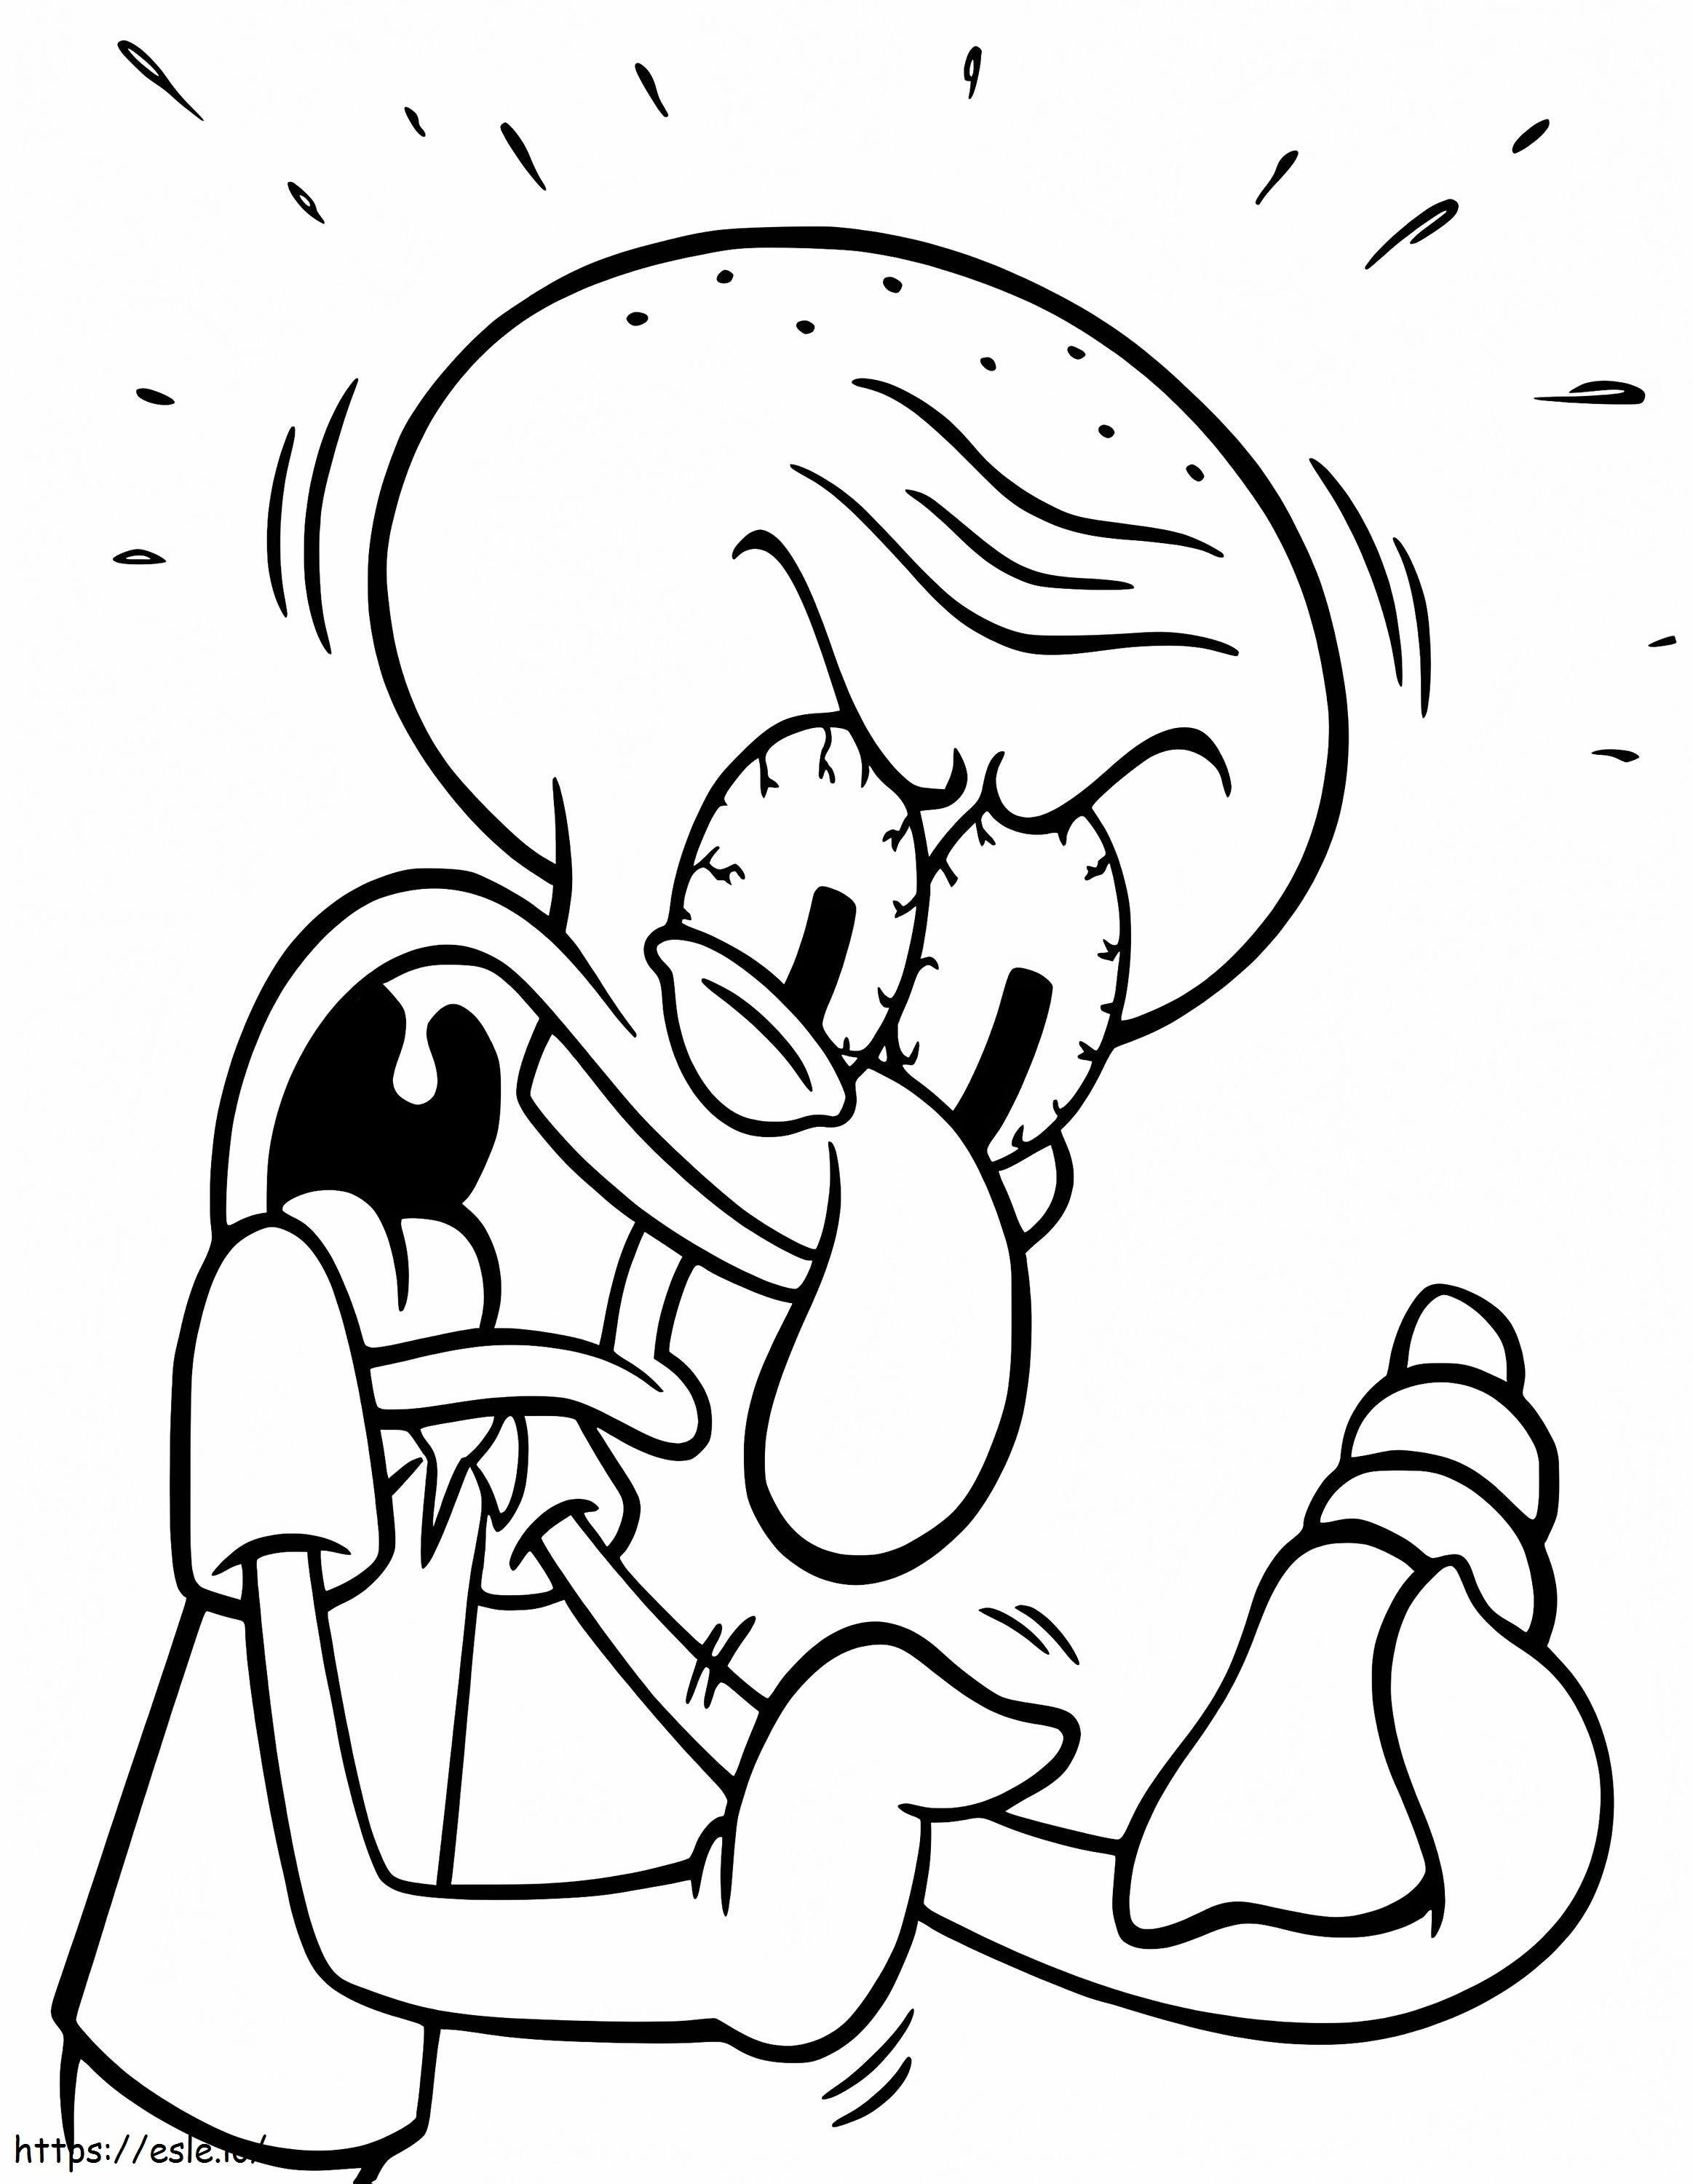 Squidward Very Angry coloring page